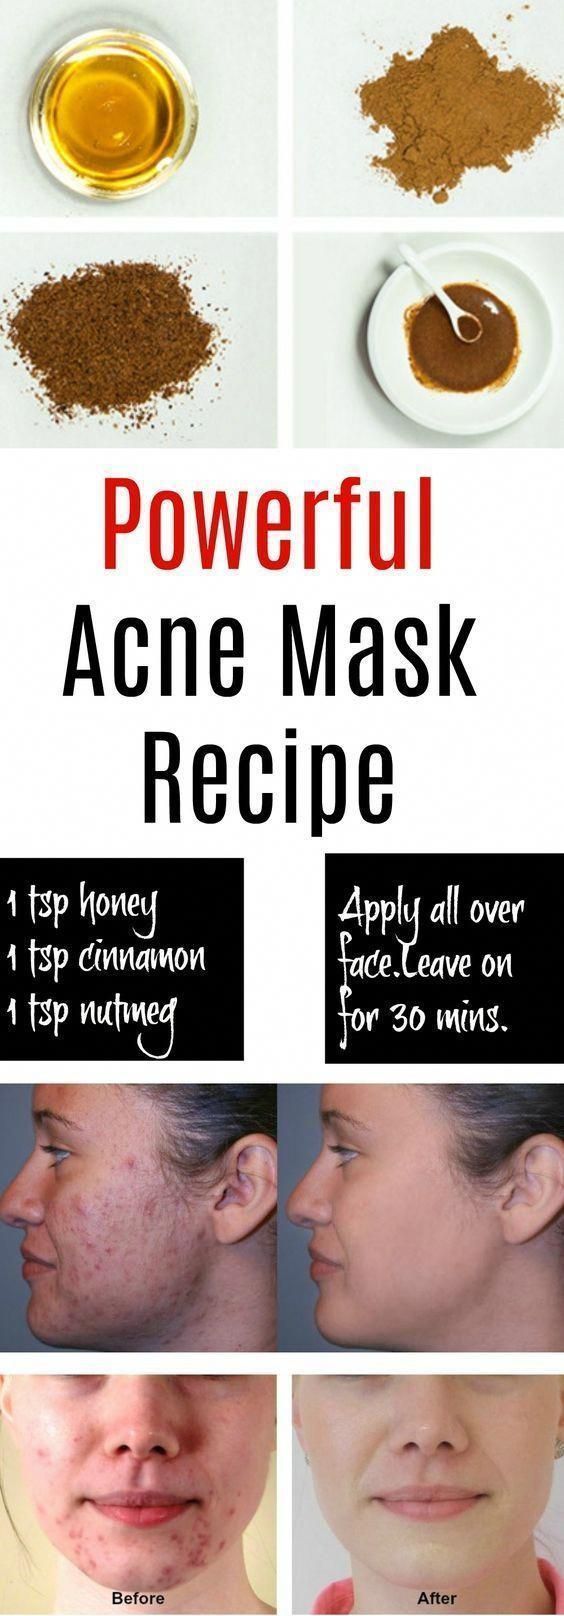 Natural Skin Care Ritual: the 13 Best Ingredients - Dr. Axe -   11 skin care Acne hacks ideas